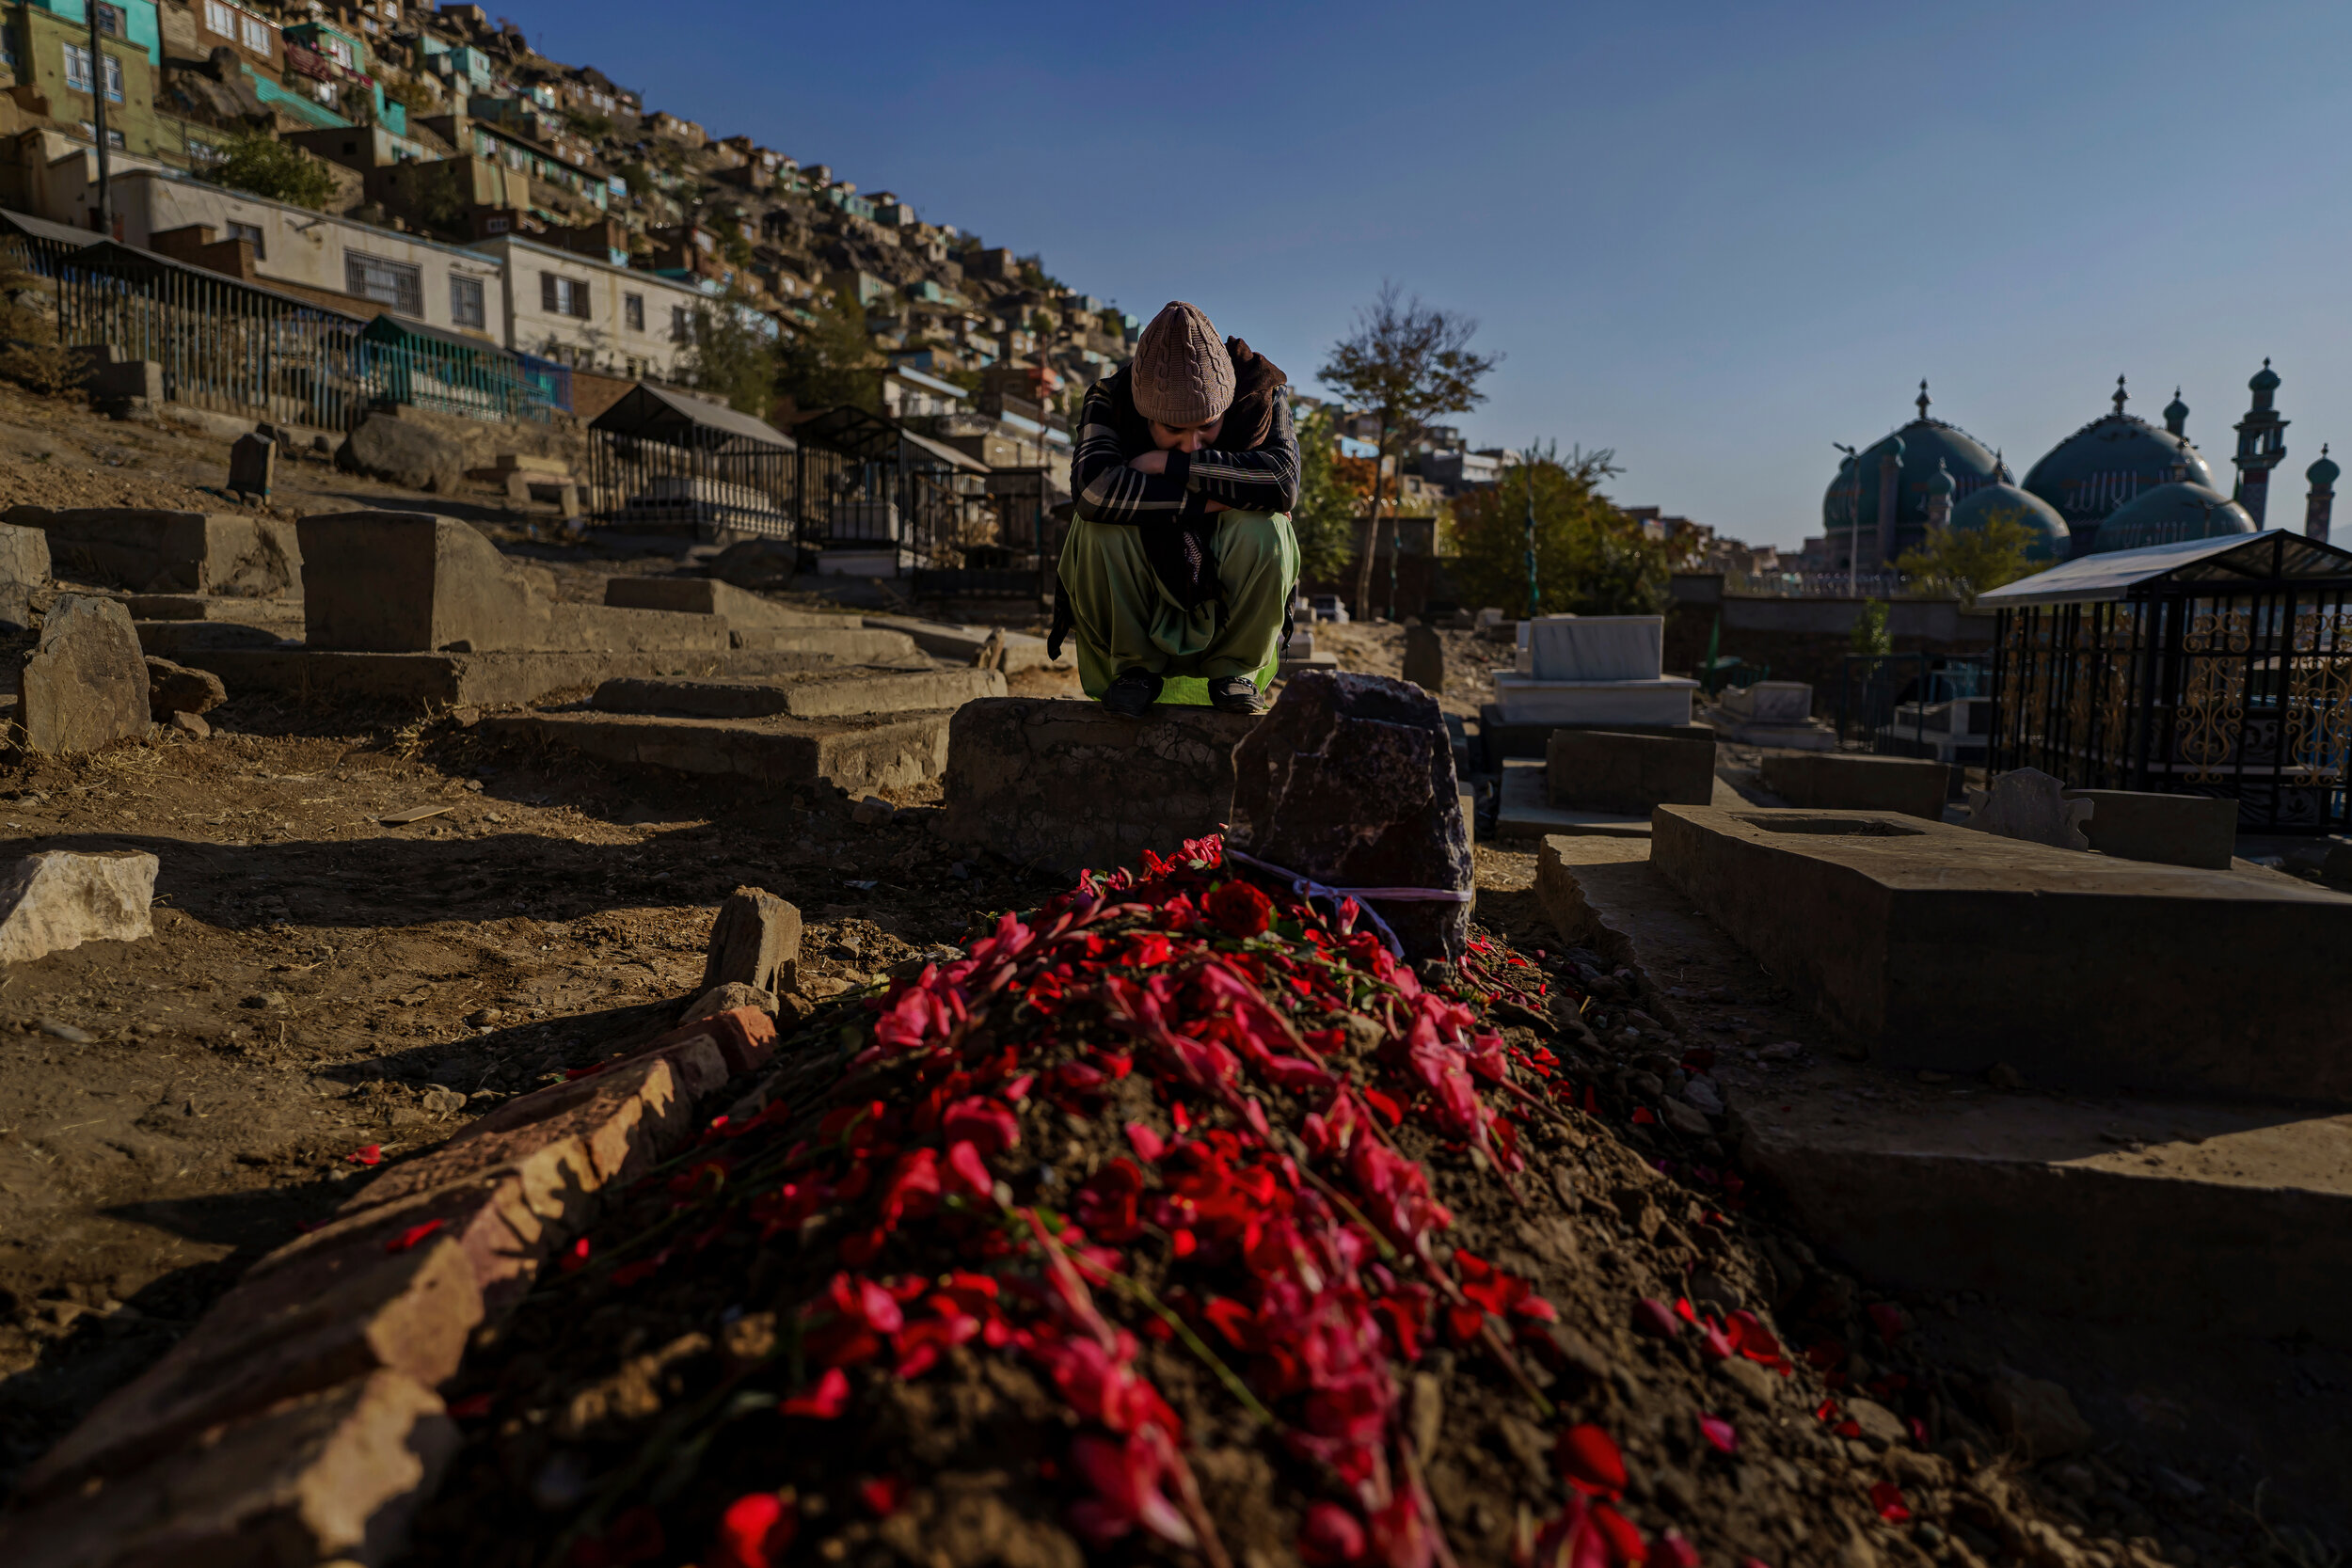  Sayed-Masih Sadaat, 23, would not budge from the head of the grave covered in flower petals as he mourns the death of his cousin, Sayeda Marzia Tahery, a 20-year old public administration and diplomacy student who was killed in the attack on Kabul U